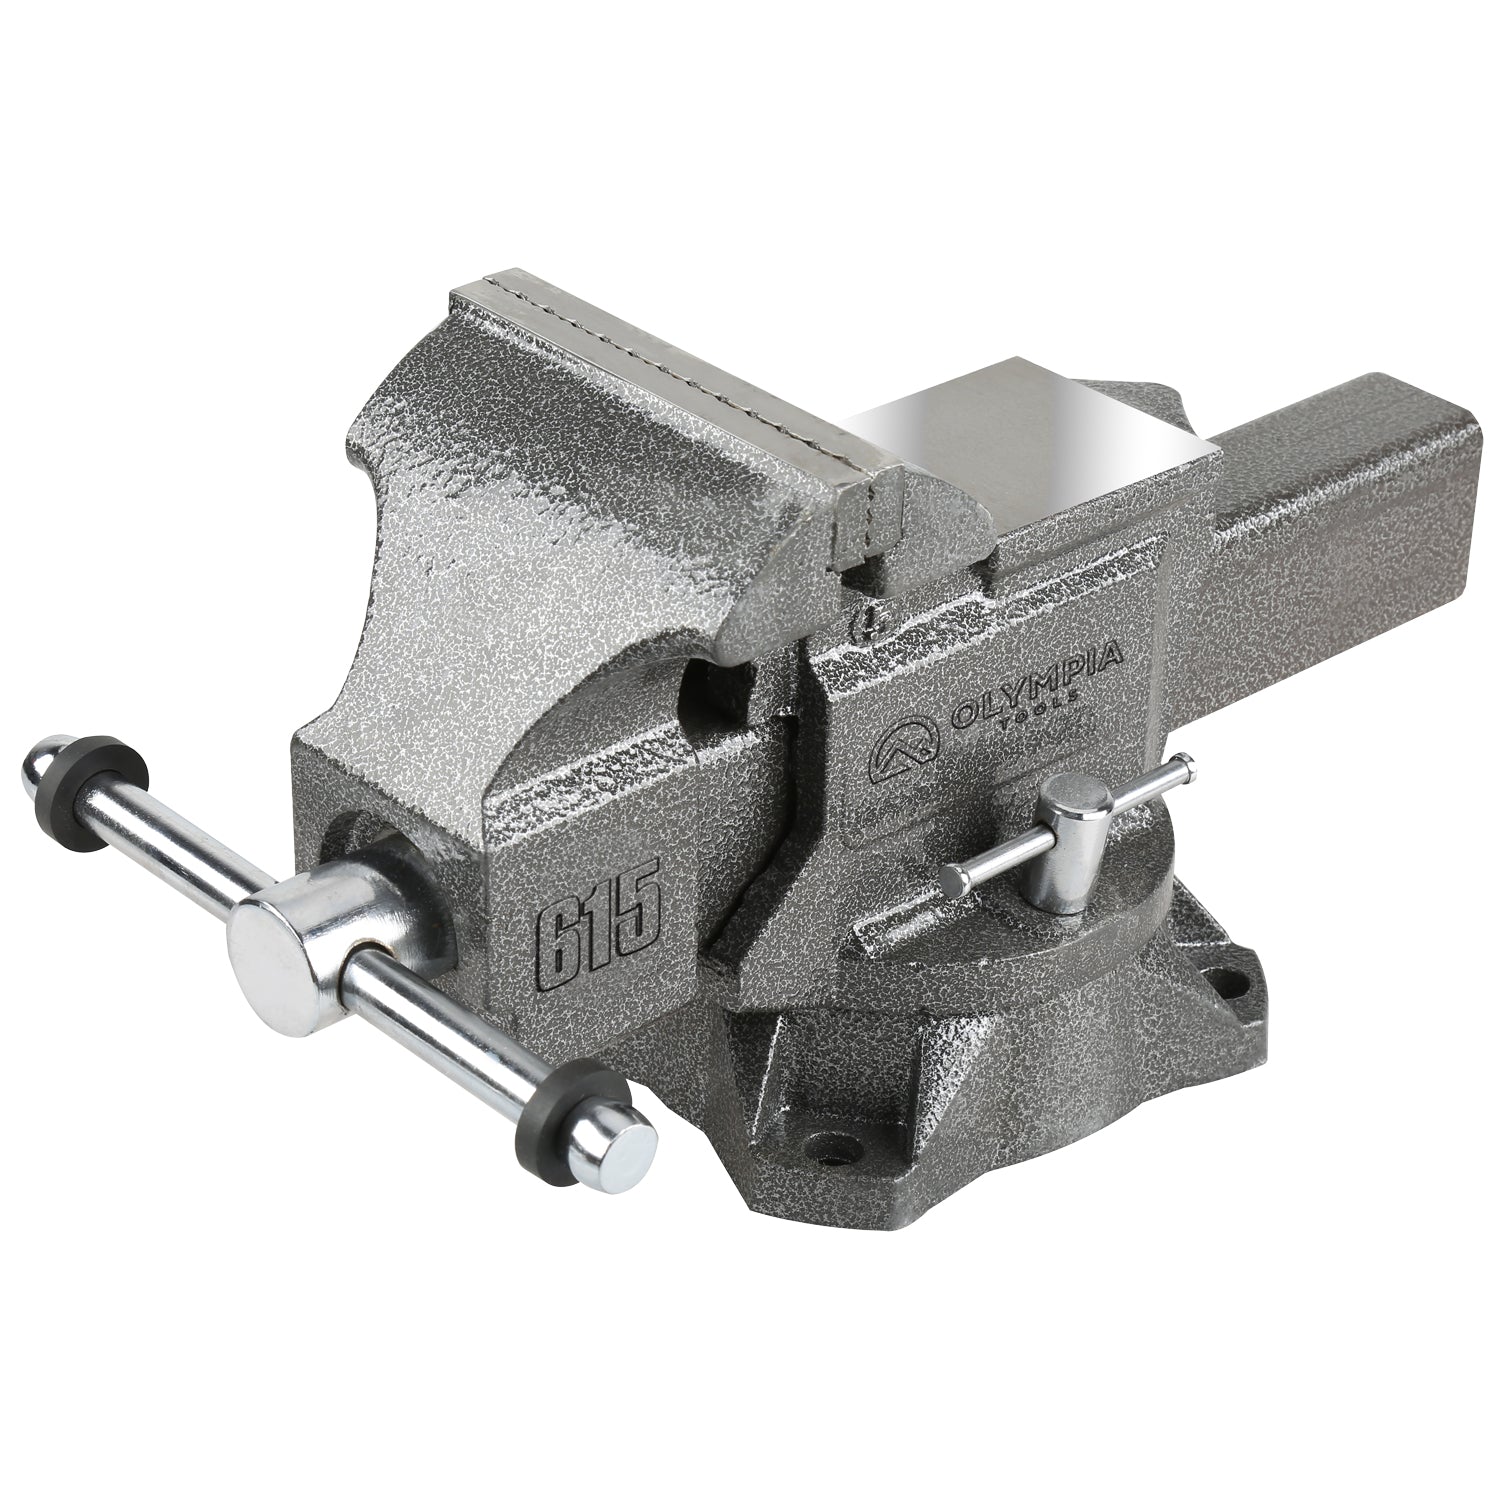 5 MECHANIC'S BENCH VISE – Olympia Tools